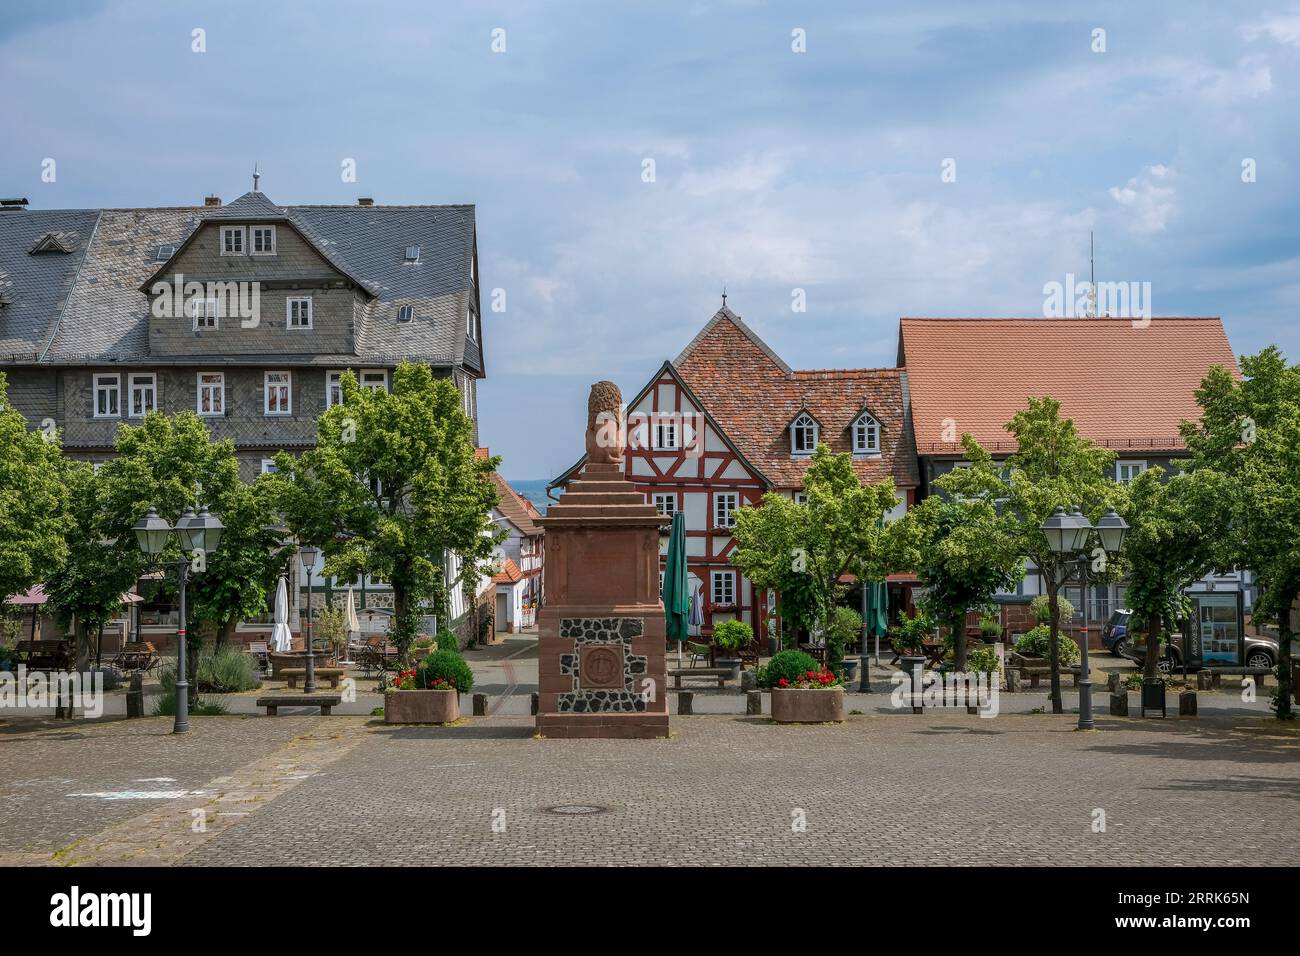 Amöneburg, Hesse, Germany - Old Town. Market place. Amöneburg is a small town in the central Hessian district of Marburg-Biedenkopf. It is located on the 365 m high mountain Amöneburg with the castle Amöneburg at the top. Stock Photo